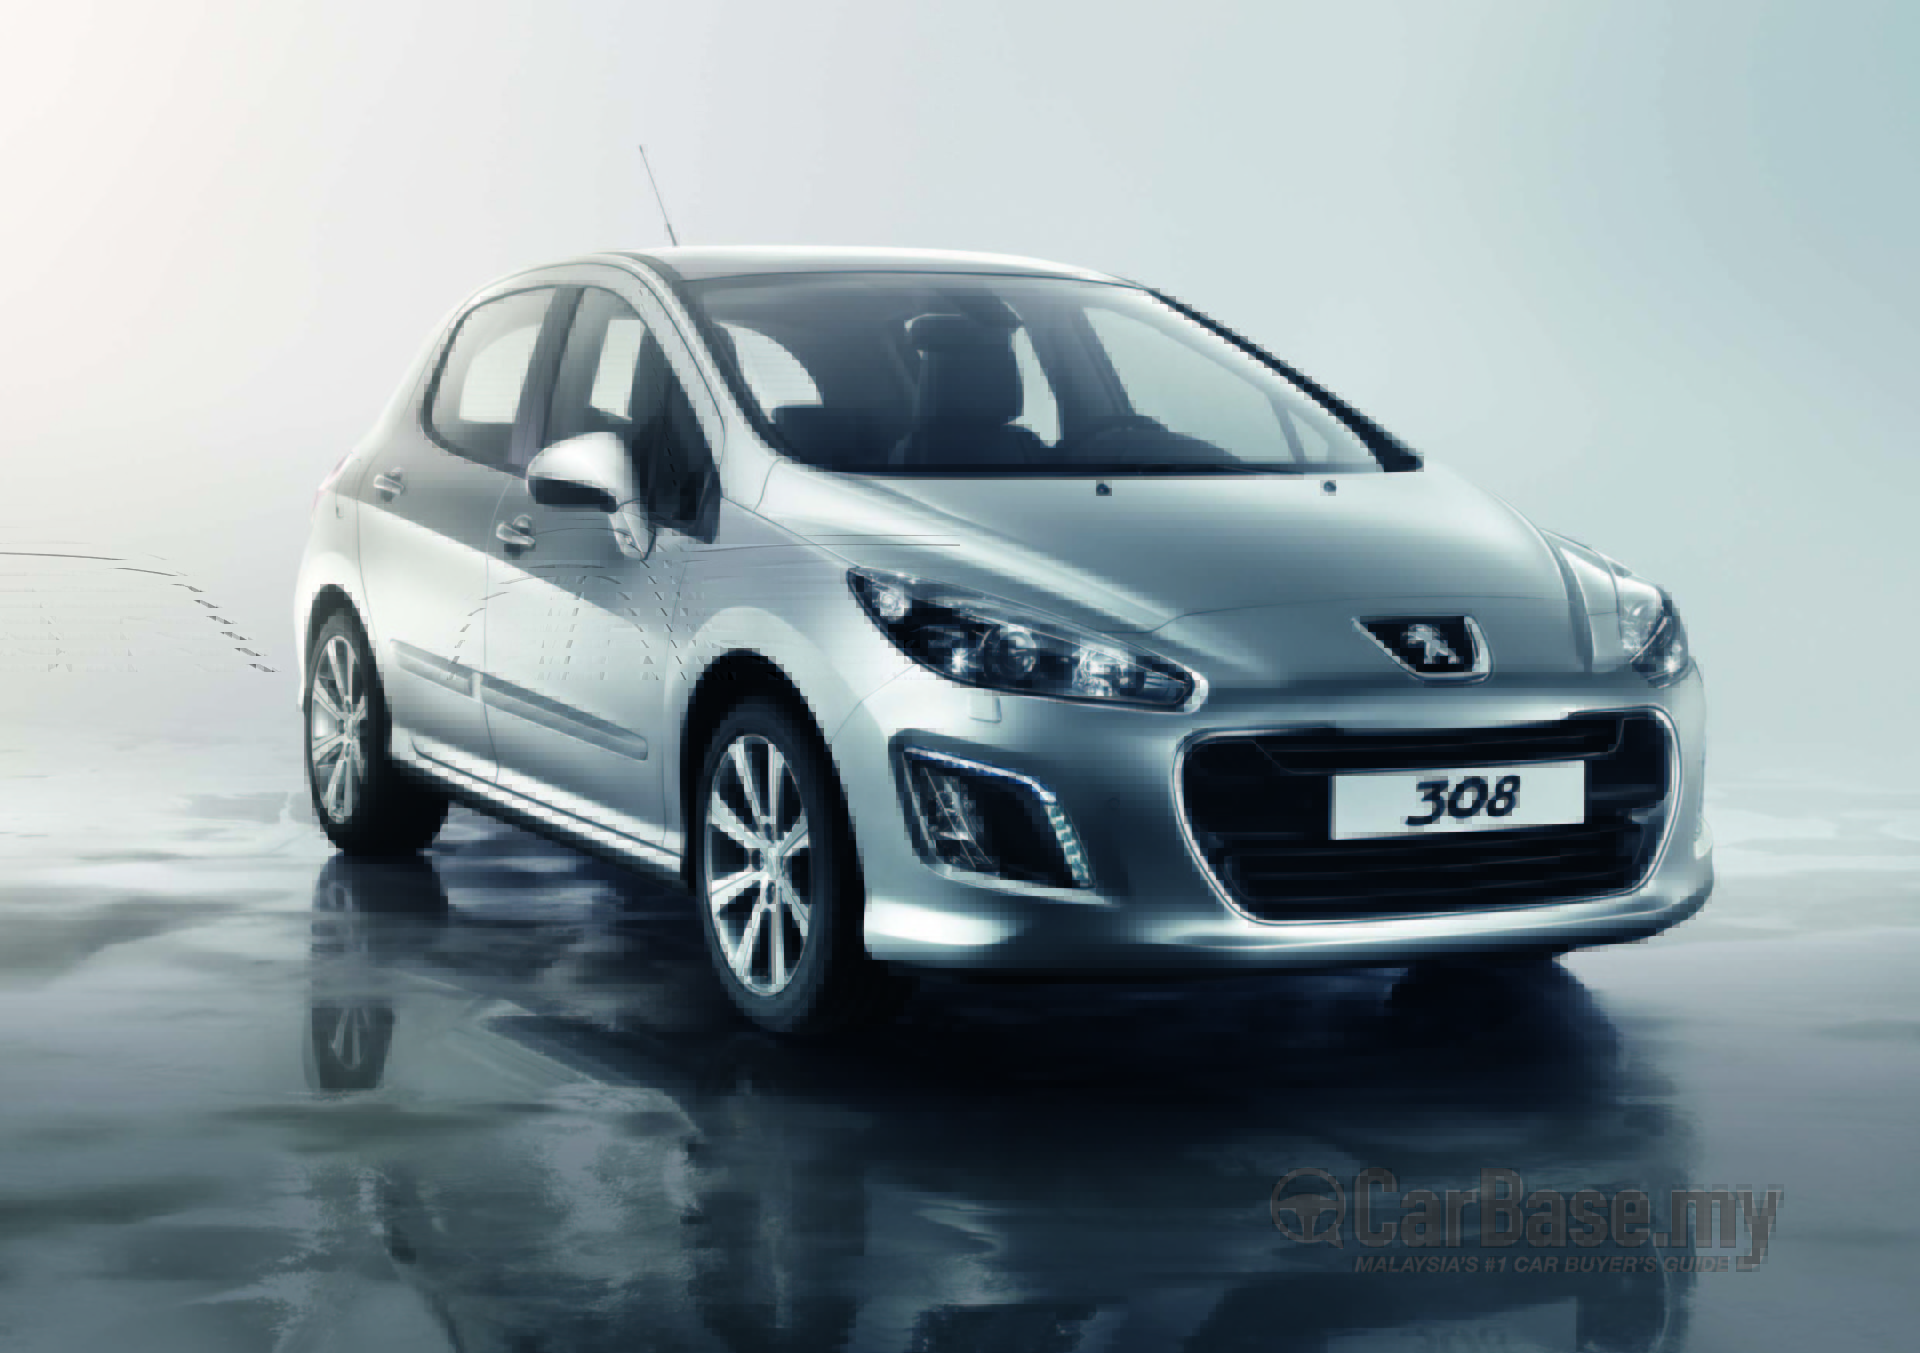 Peugeot 308 T7 Facelift (2012) Exterior Image 7836 in